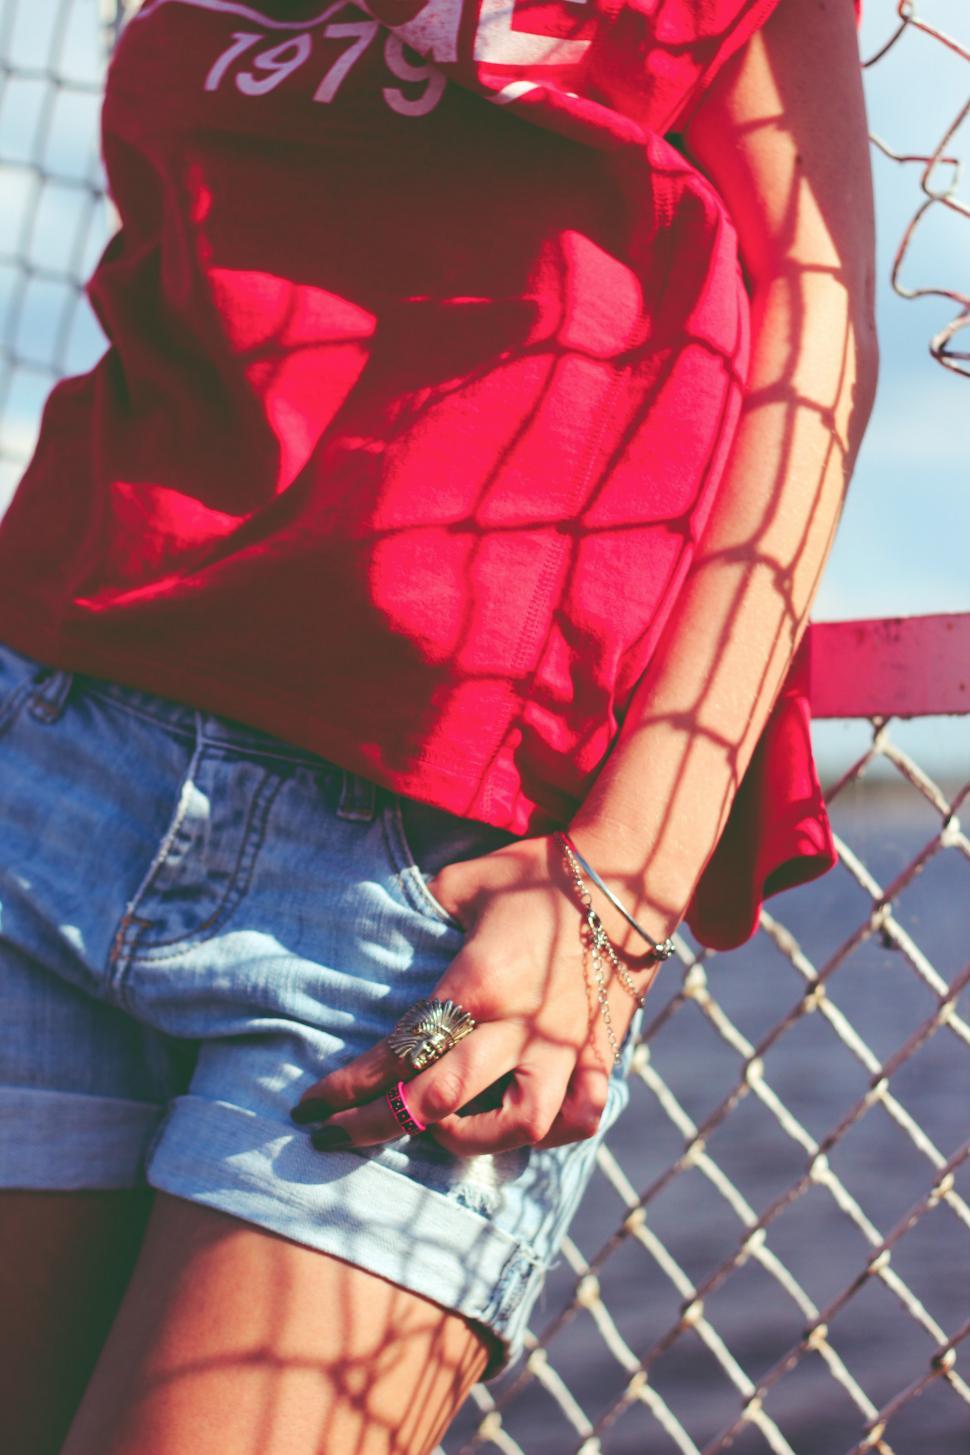 Free Image of Fence Red Ring blouse bracelet chain link jeans jewellery jewelry shorts person man happy 